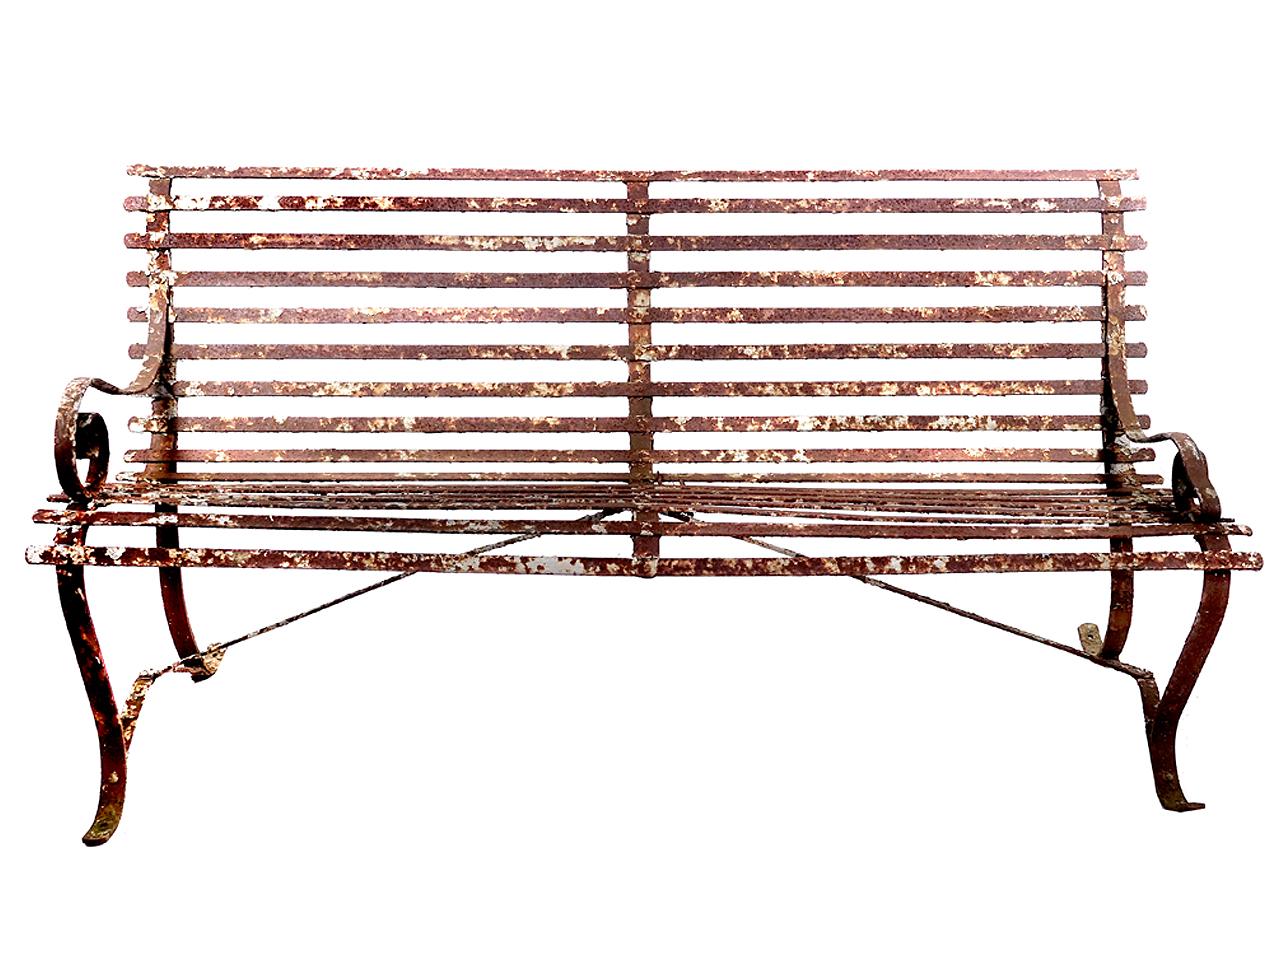 This is the real thing and its solid with the original rustic patina. All the joints are hand-riveted as they should be for a bench this early. The finish is as found. Add a piece of history to your yard or front porch but don't wear white paints.